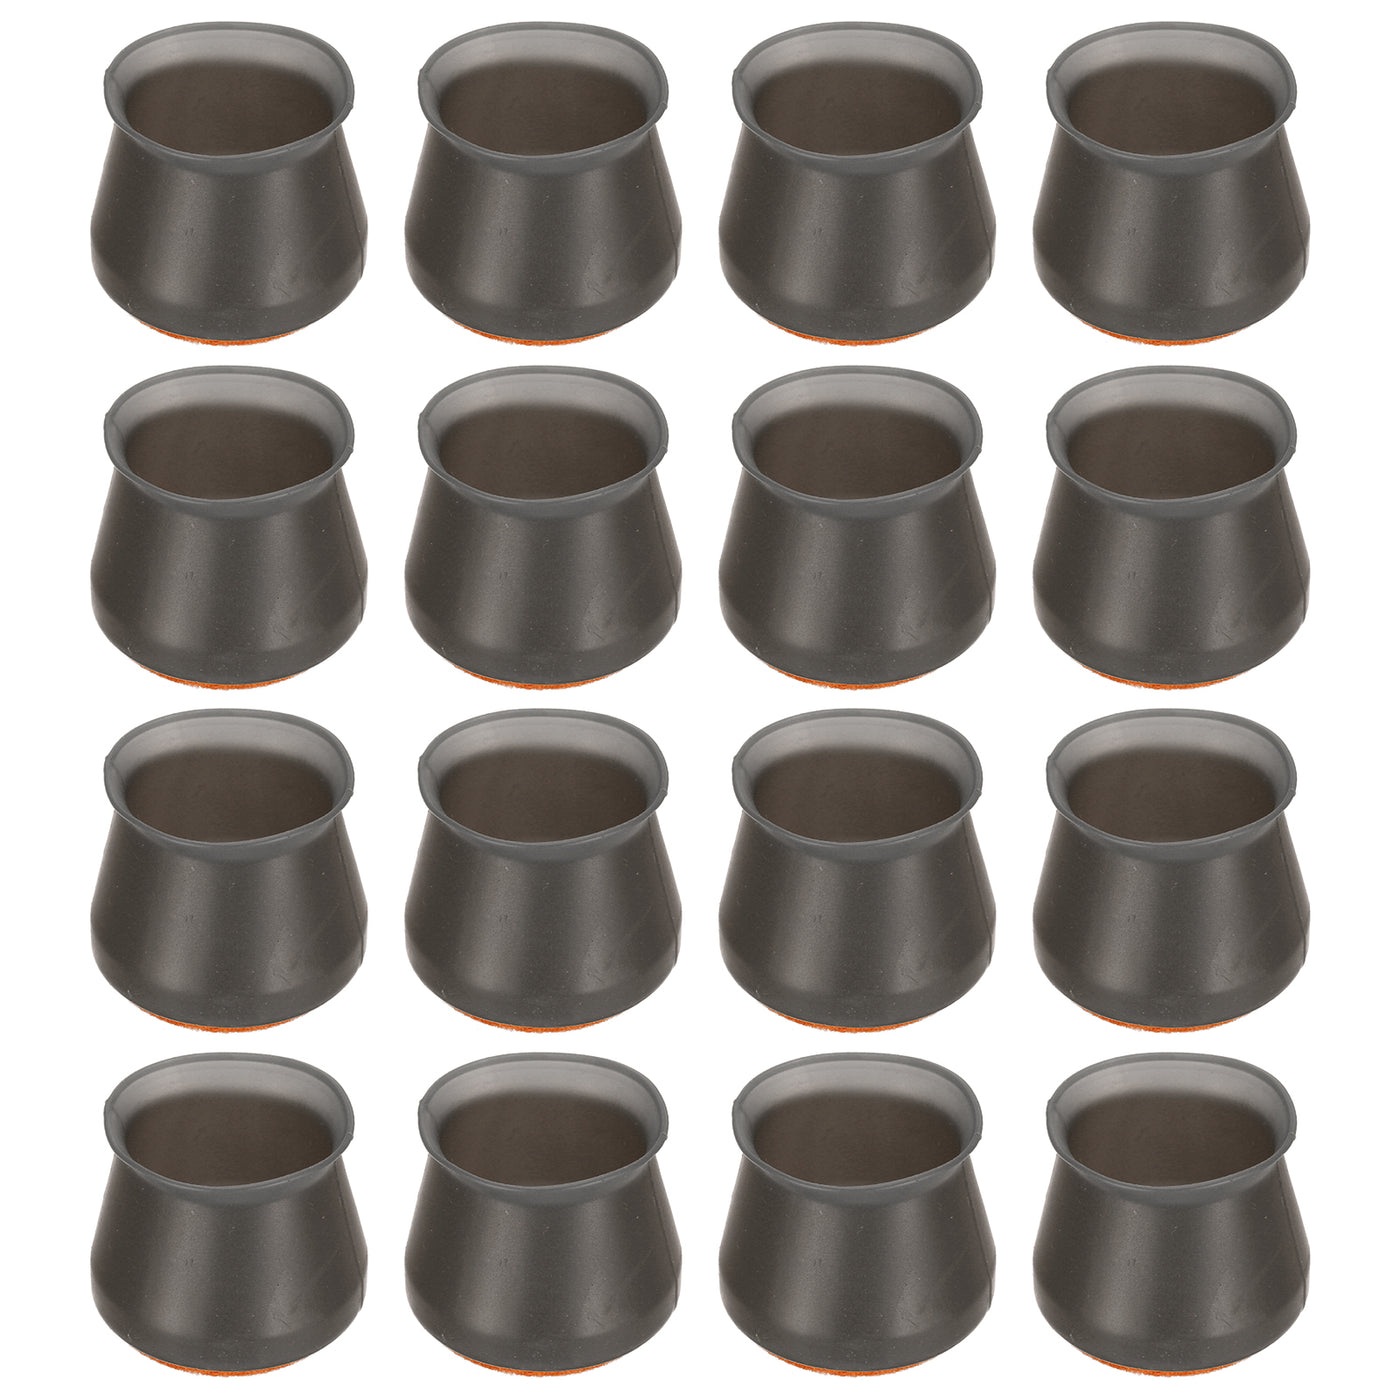 uxcell Uxcell Chair Leg Floor Protectors, 24Pcs 38mm/ 1.5" Silicone & Felt Chair Leg Cover Caps for Hardwood Floors (Black)